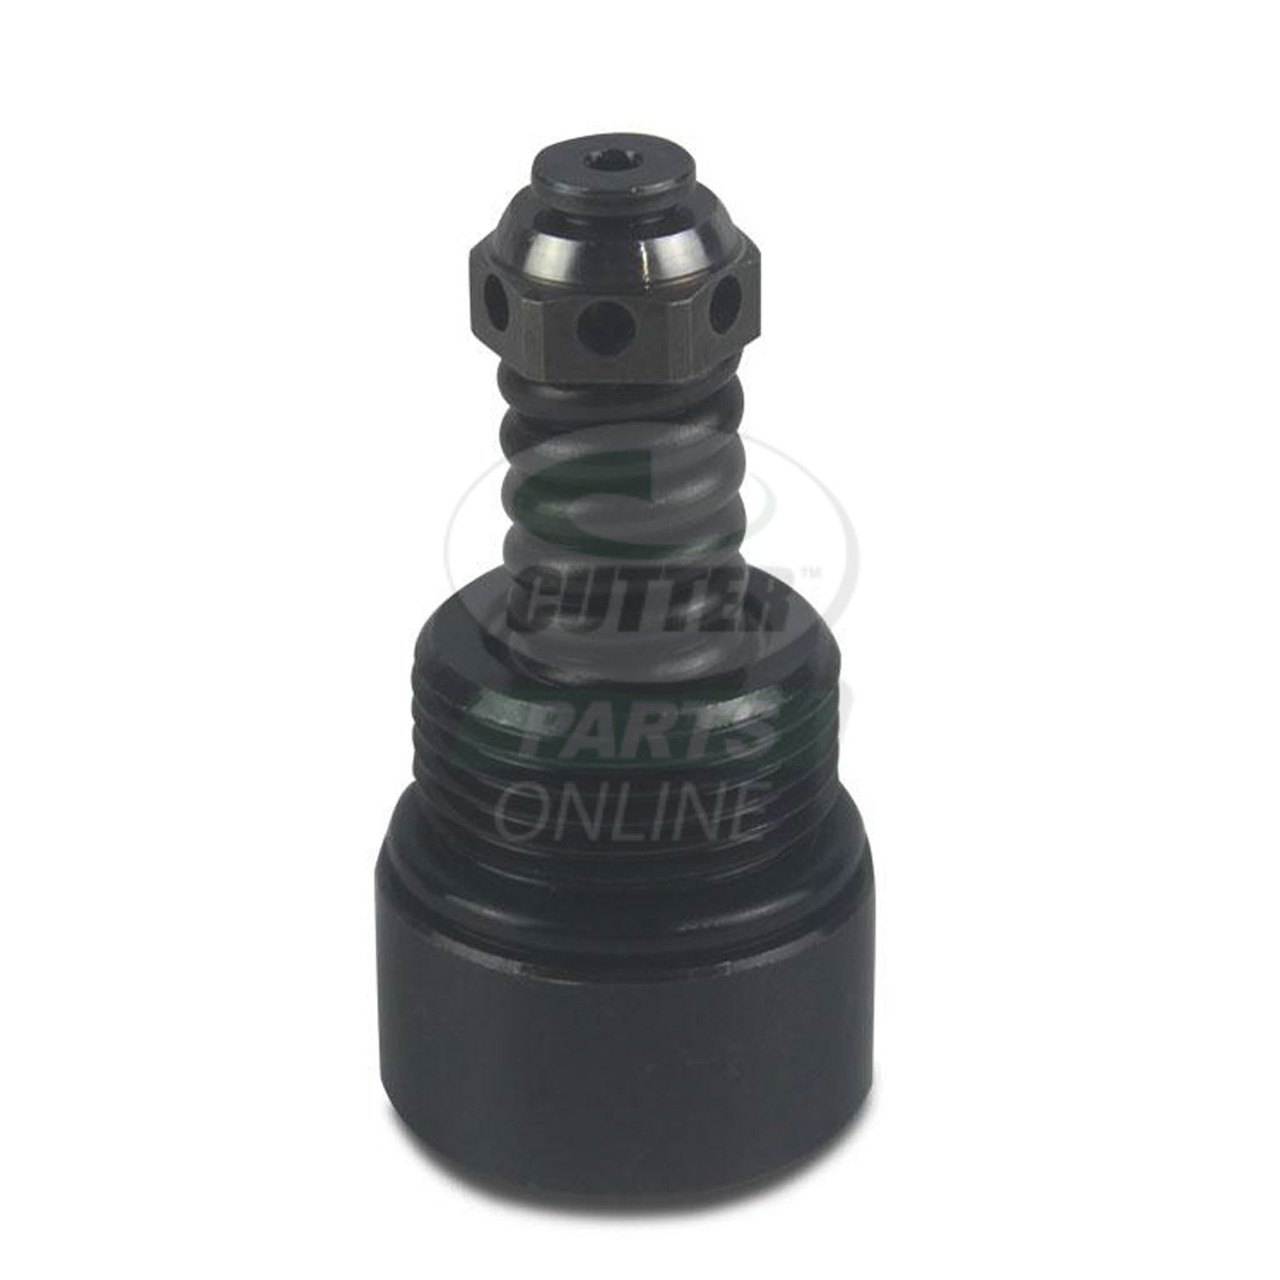 New Check Valve Assembly - Replaces Toro 105-3812